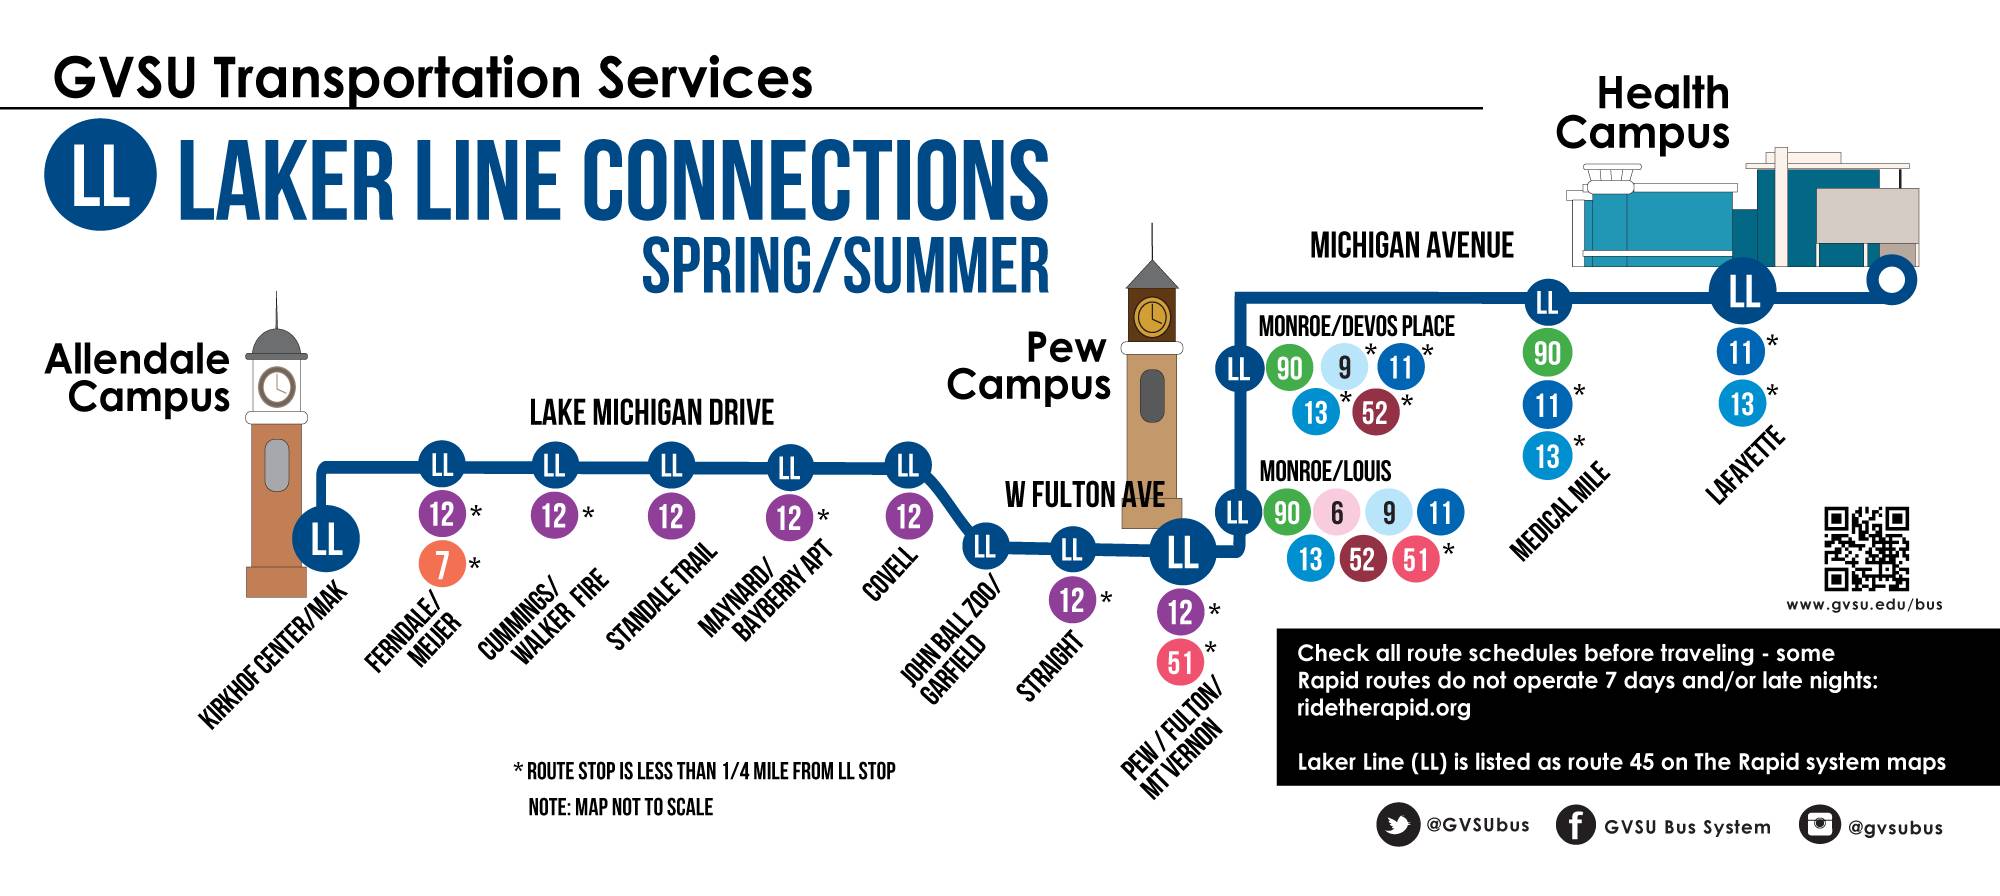 Laker Line Connections to Other Rapid Routes - Spring/Summer